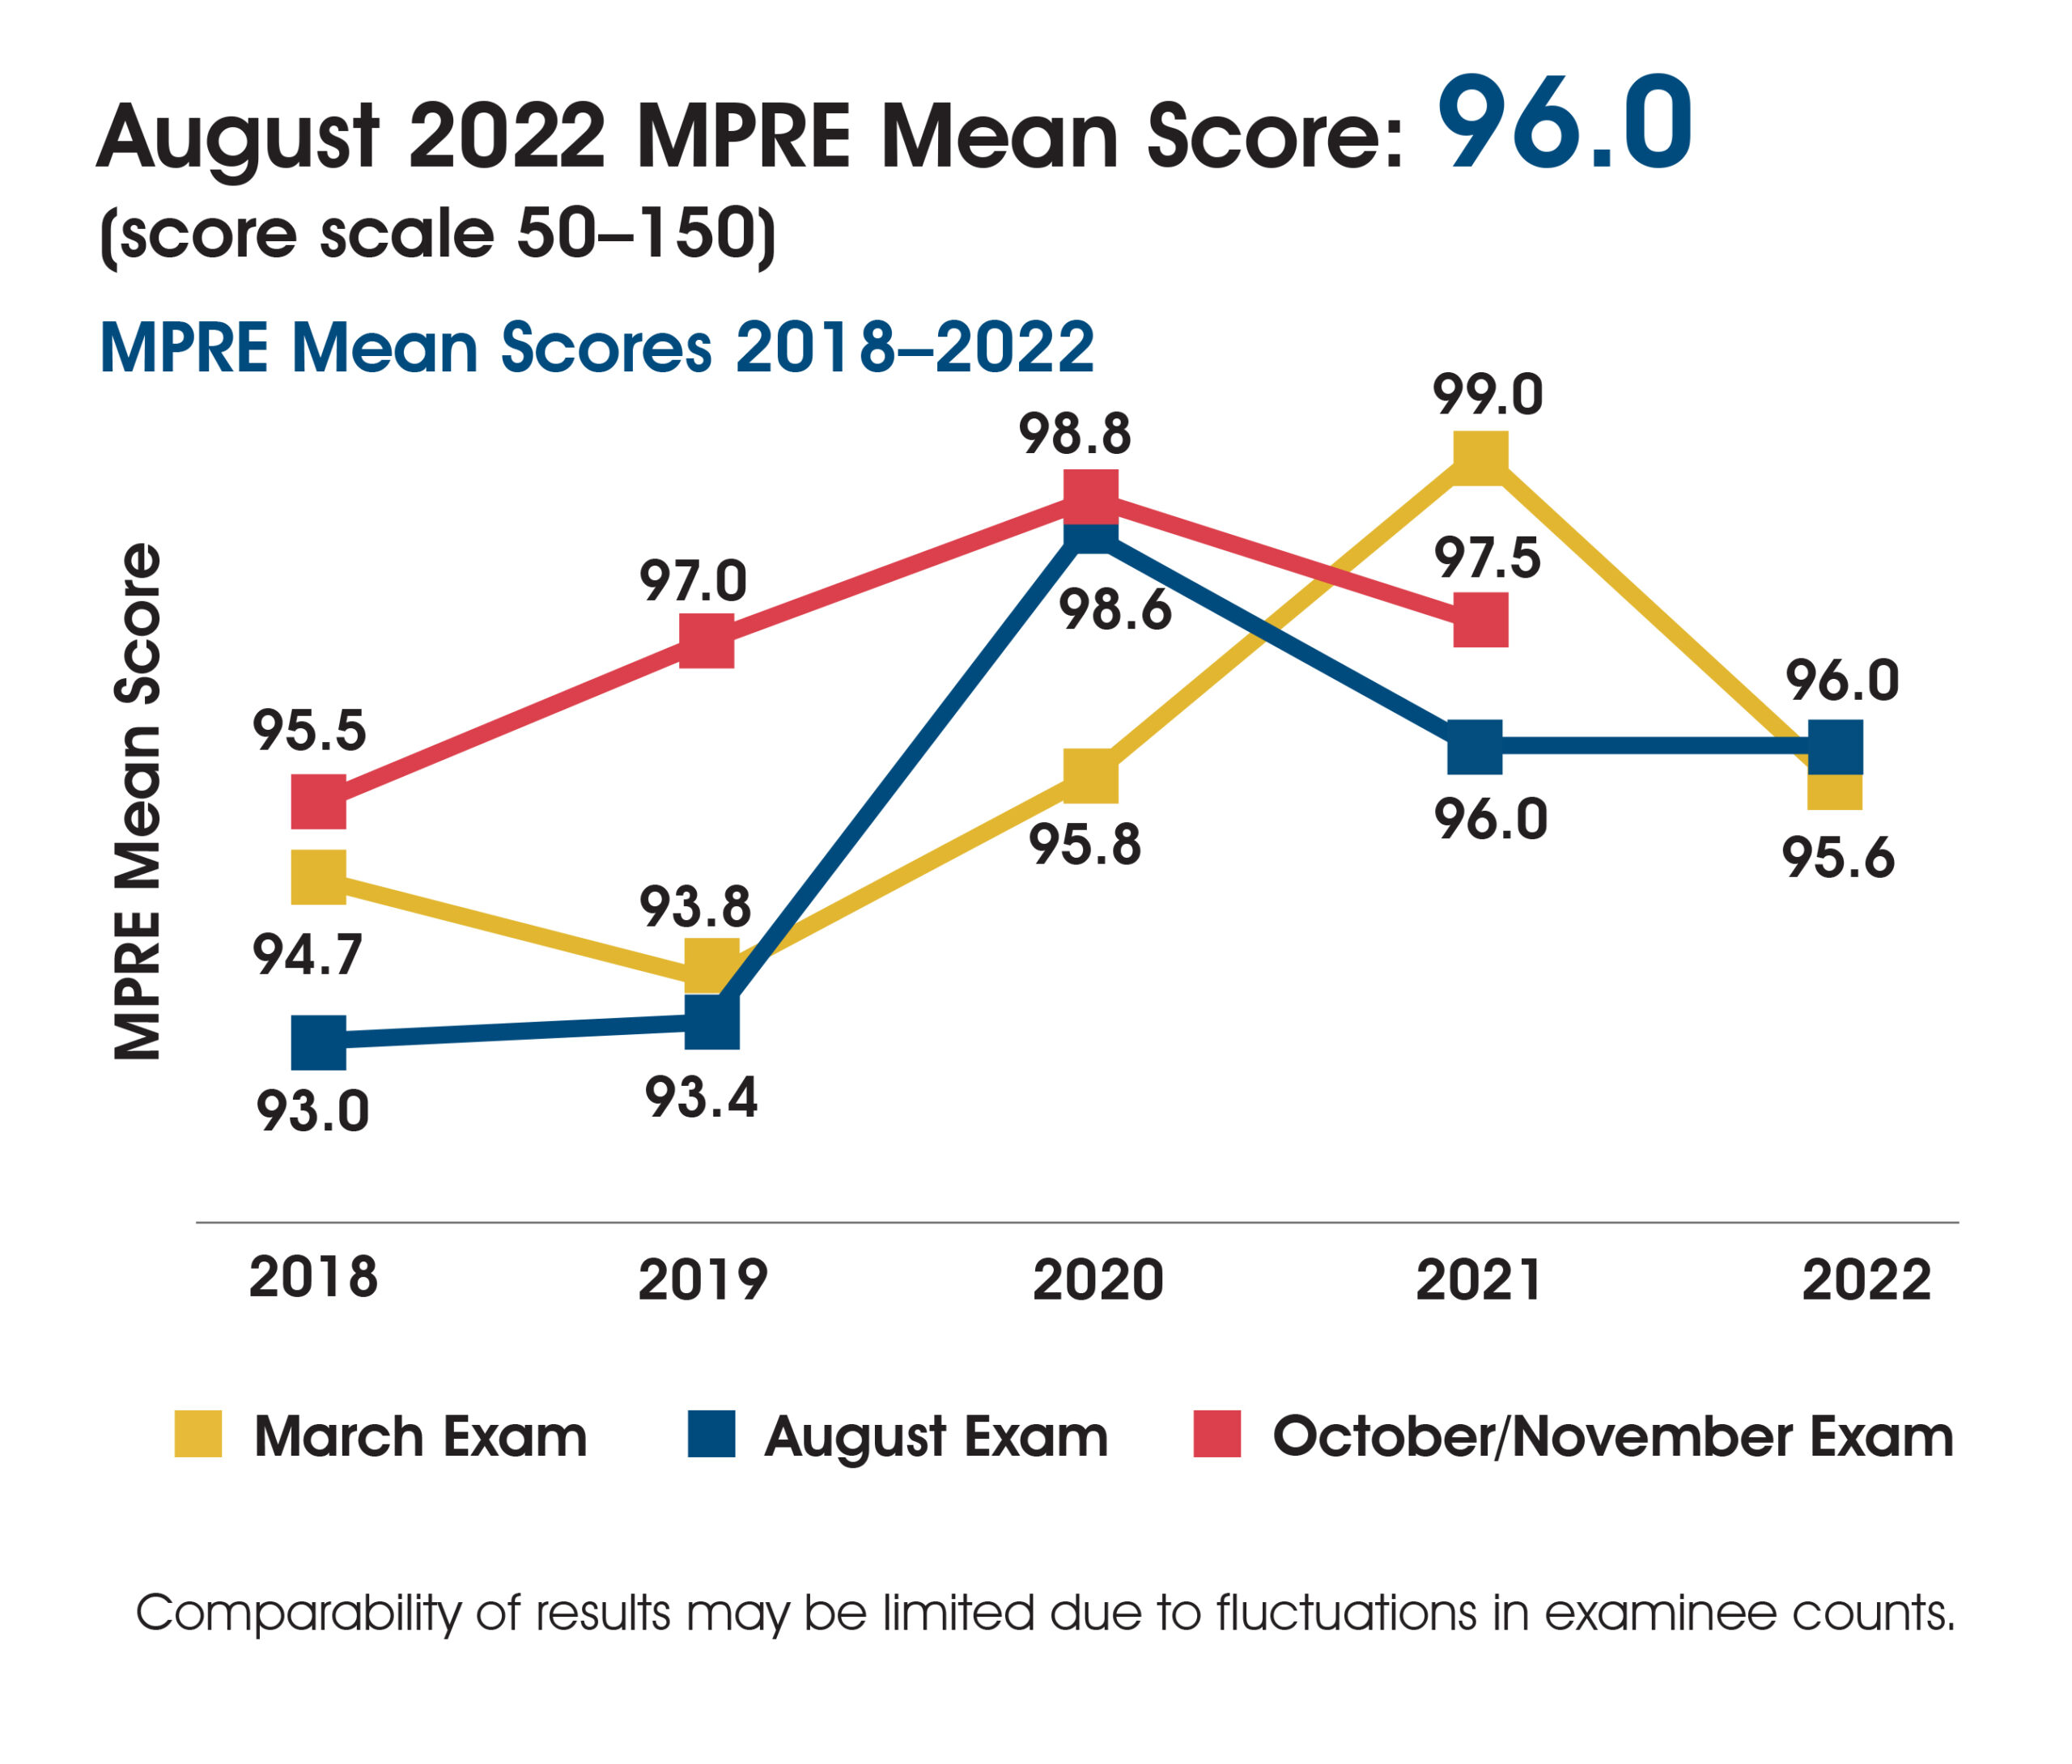 A chart showing MPRE mean scores 2018-2022. In March 2018-2022 the mean score was 94.7, 93.8, 95.8, 99.0, and 95.6. In August 2018-2022 the mean score was 93.0, 93.4, 98.6, 96.0, and 96.0. In October/November 2018-2021 the mean score was 95.5, 97.0, 98.8, and 97.5. The chart includes the following note: Comparability of results may be limited due to fluctuations in examinee counts.